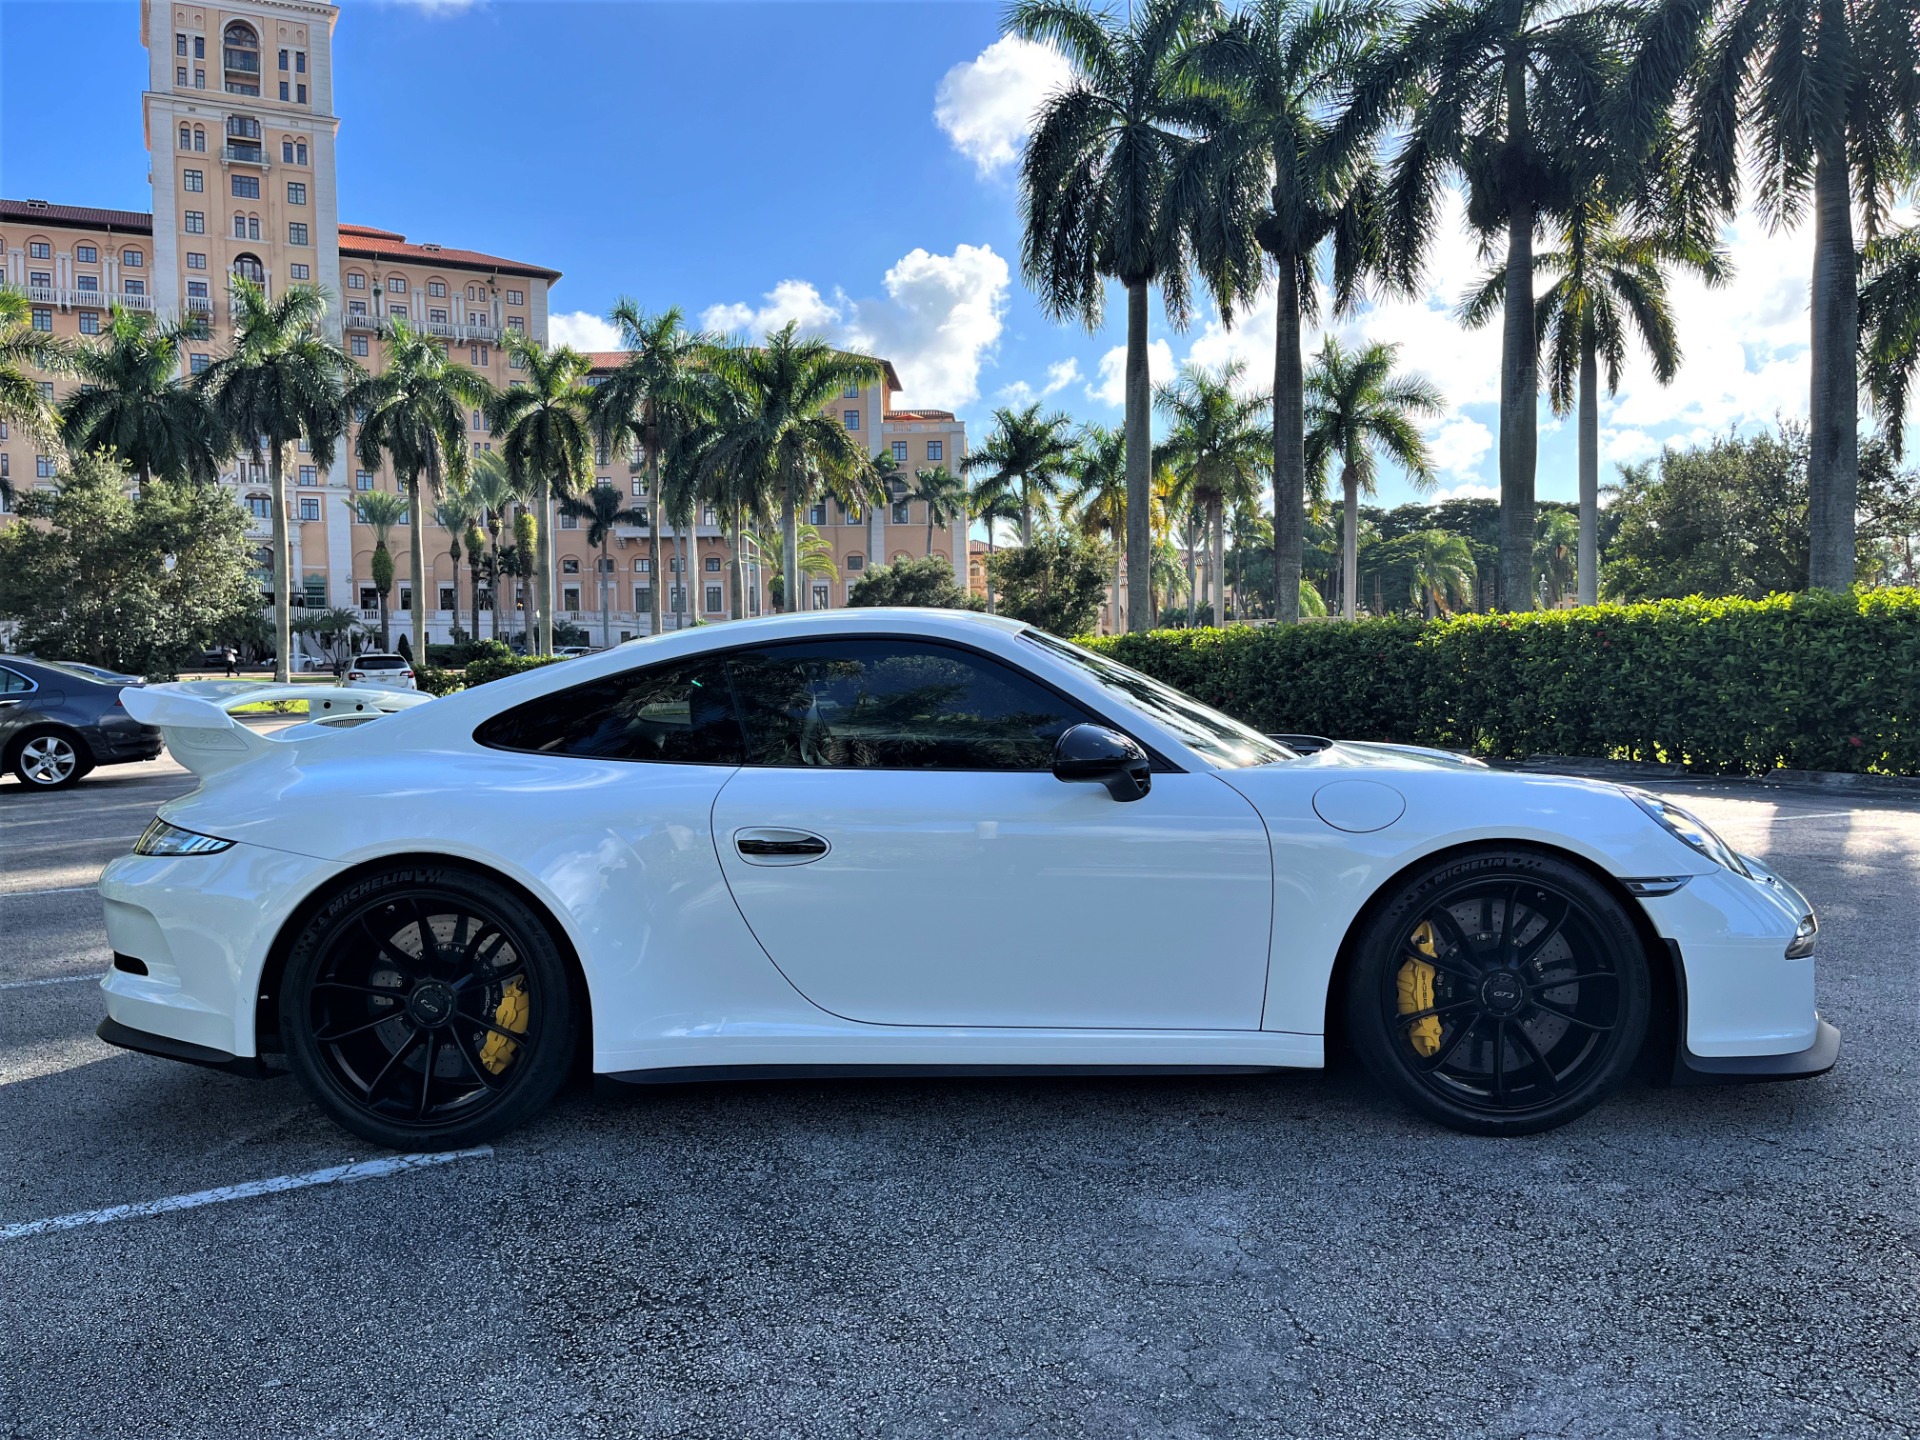 Used 2014 Porsche 911 GT3 for sale $142,850 at The Gables Sports Cars in Miami FL 33146 2